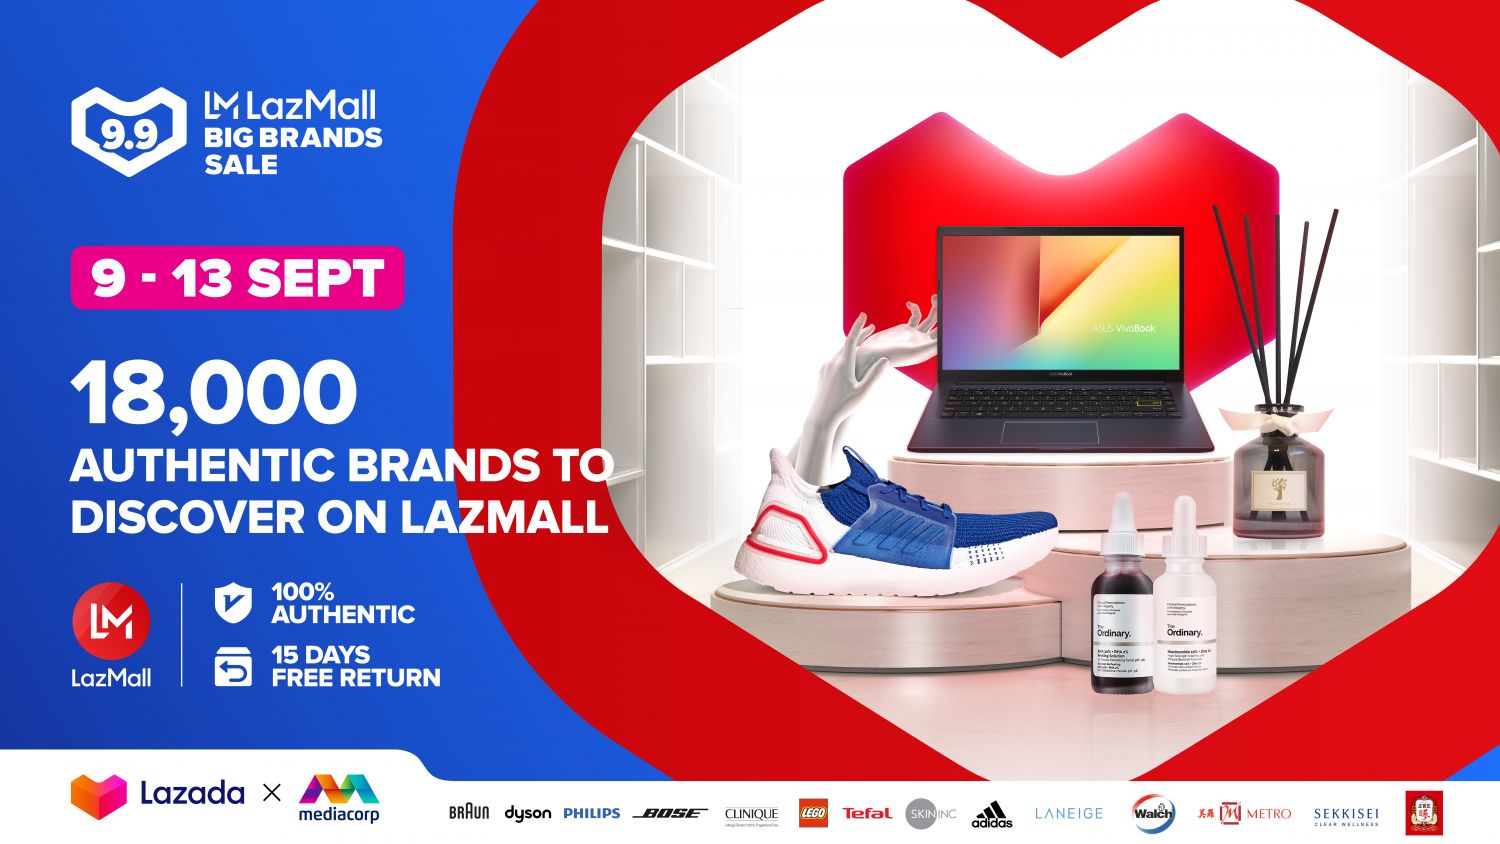 verlegen Verplicht Glimlach Lazada's Collaboration With Mediacorp Continues With The 9.9 LazMall Big  Brands Sale And Online Tech Show This September | Geek Culture